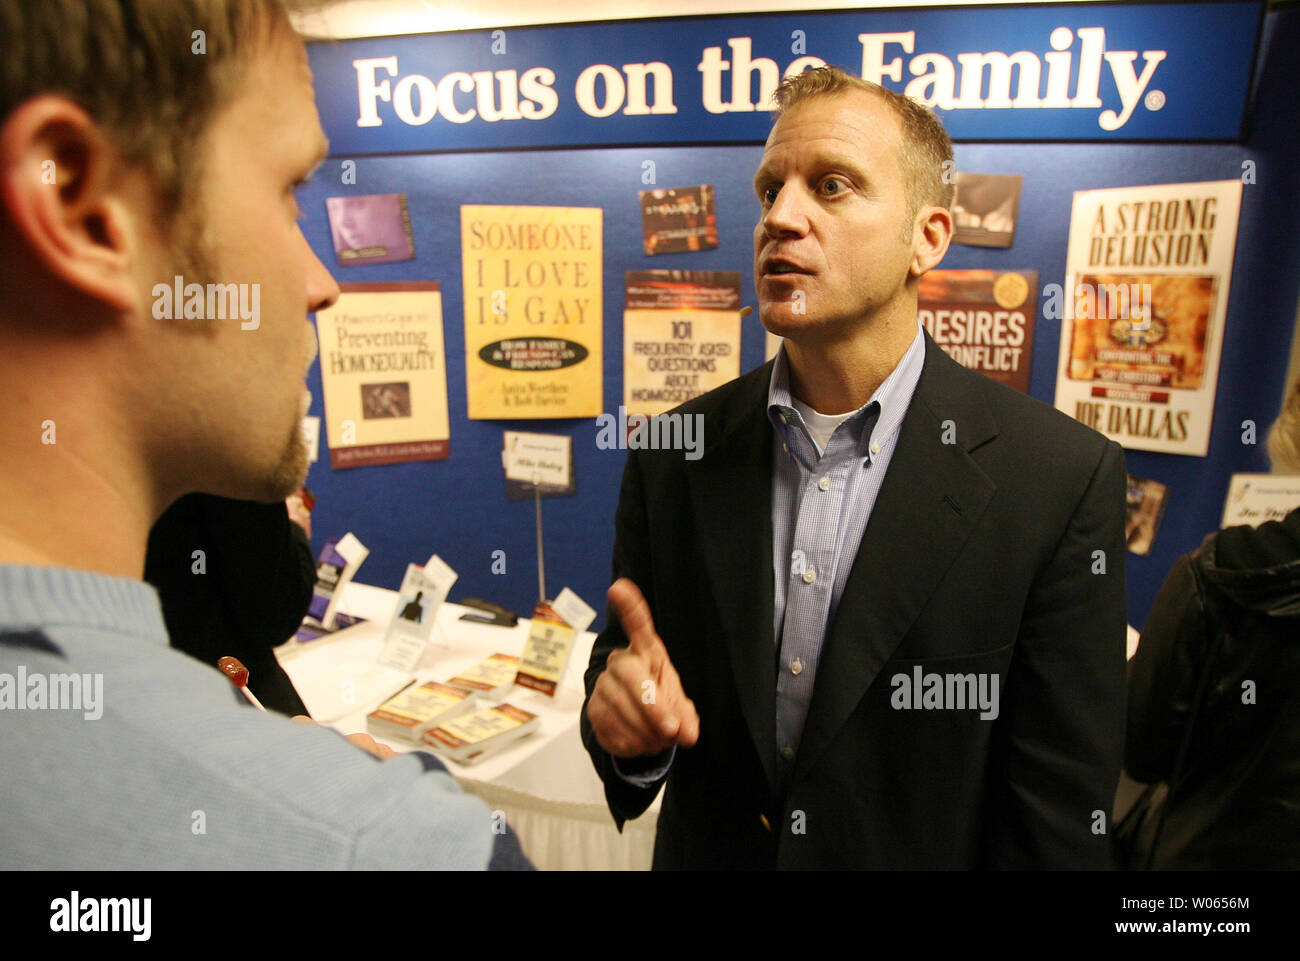 Mike Haley, Manager of Gender Issues for Focus on the Family (R) talks with Brad Allen during a break at the Love Won Out conference at the First Evangelical Church in Manchester, MO  on February 25, 2006. The one day conference preaches that homosexuality is a sin and unwanted homosexuality can be overcome. Several billboards advertising the conference have been vandalized and protesters were posted outside throughout the day. (UPI Photo/Bill Greenblatt) Stock Photo